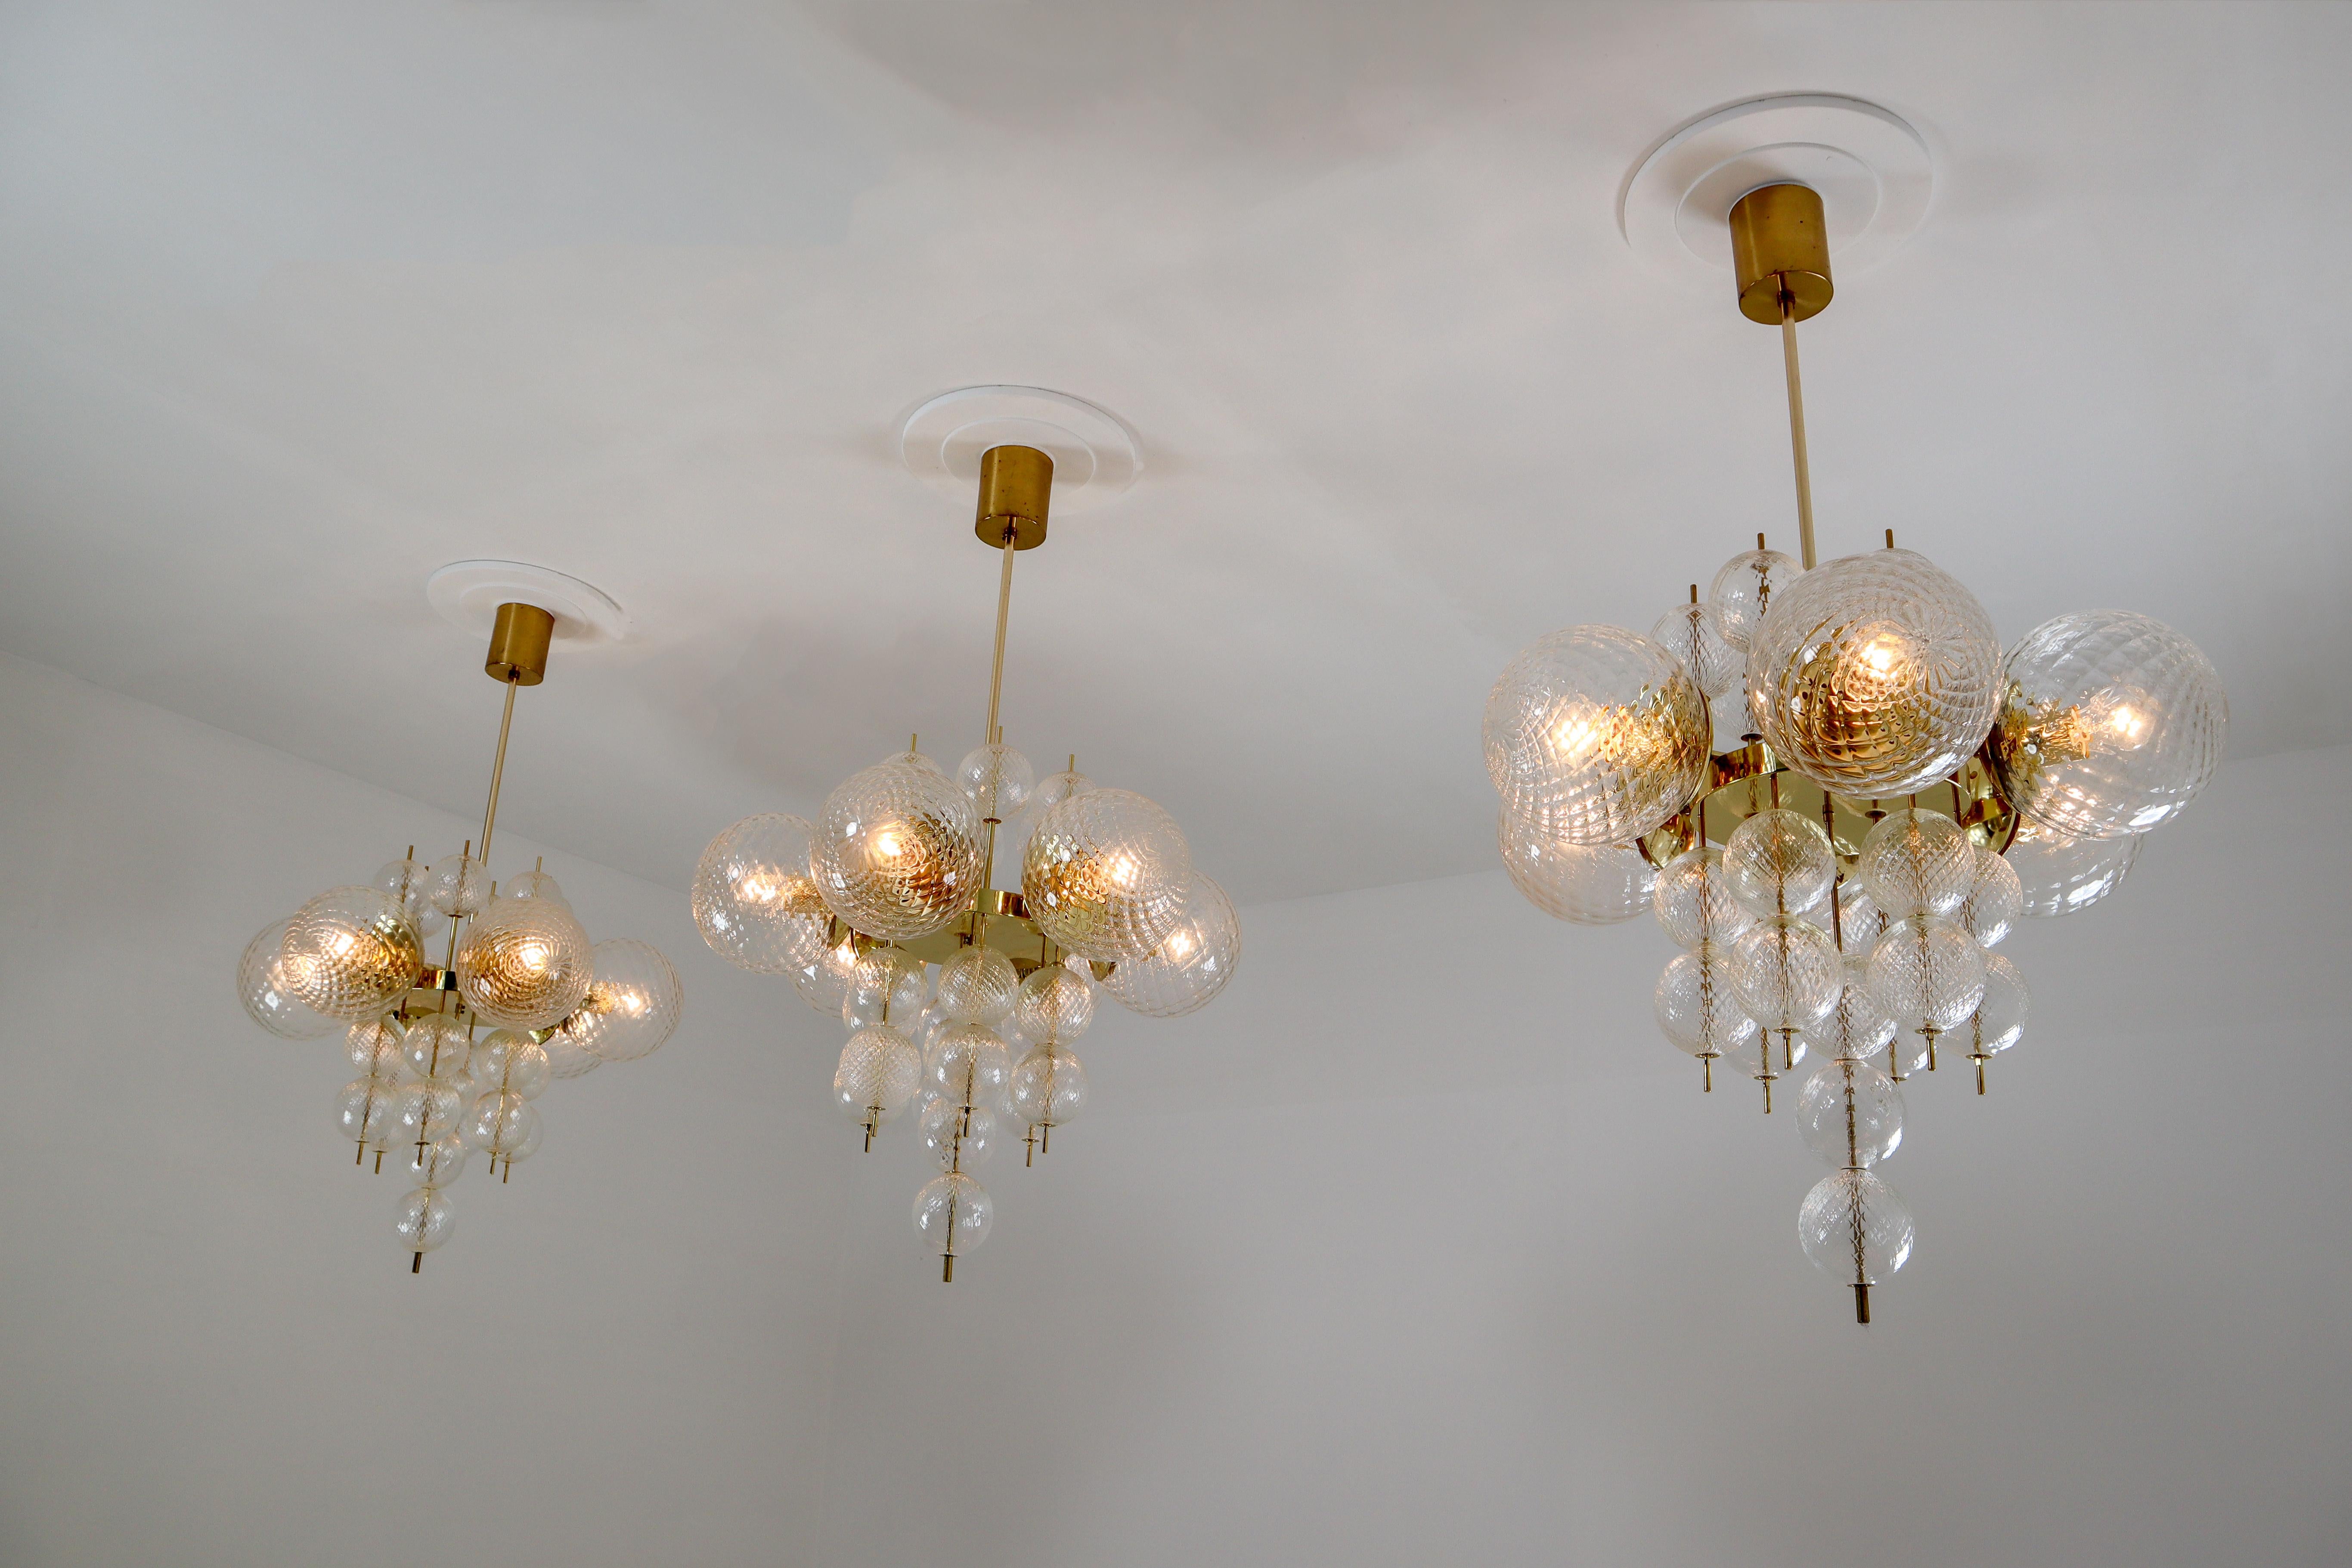 This set of three brass chandeliers was produced by Fa. Preciosa in Kamenicky Senov, Czechoslovakia in the 1970s. A spirited and chic design set of three chandeliers with brass fixture and art-glass. The chandelier with brass frame consist of six